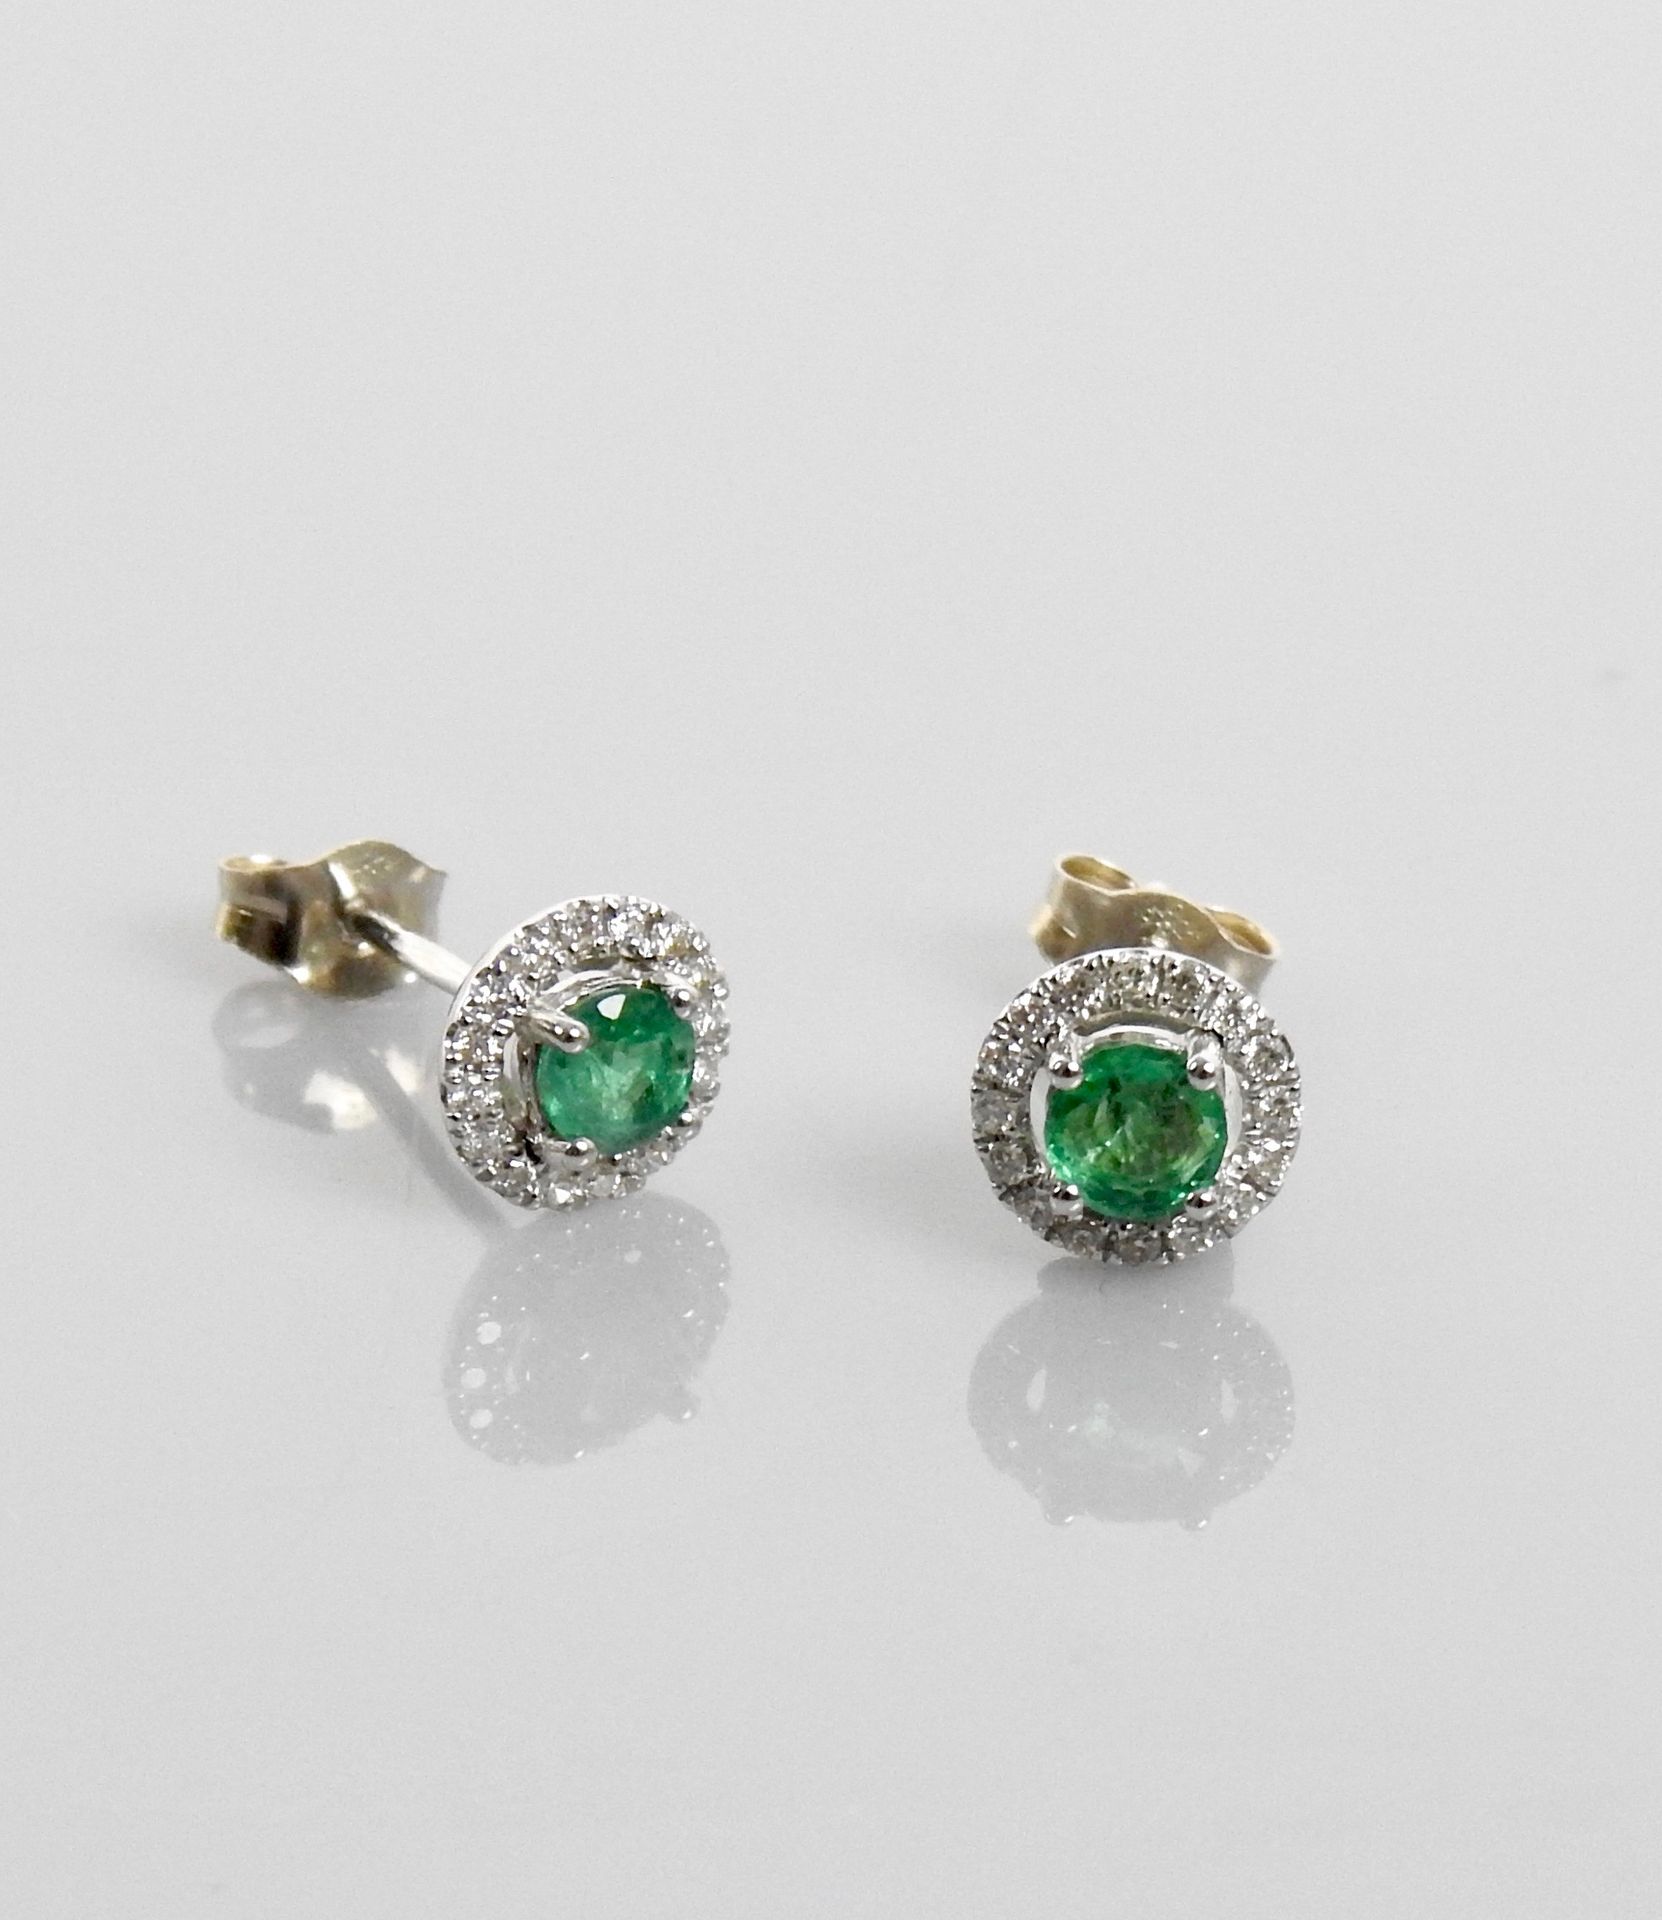 Null Earrings in white gold, 750 MM, each with an emerald hemmed with diamonds, &hellip;